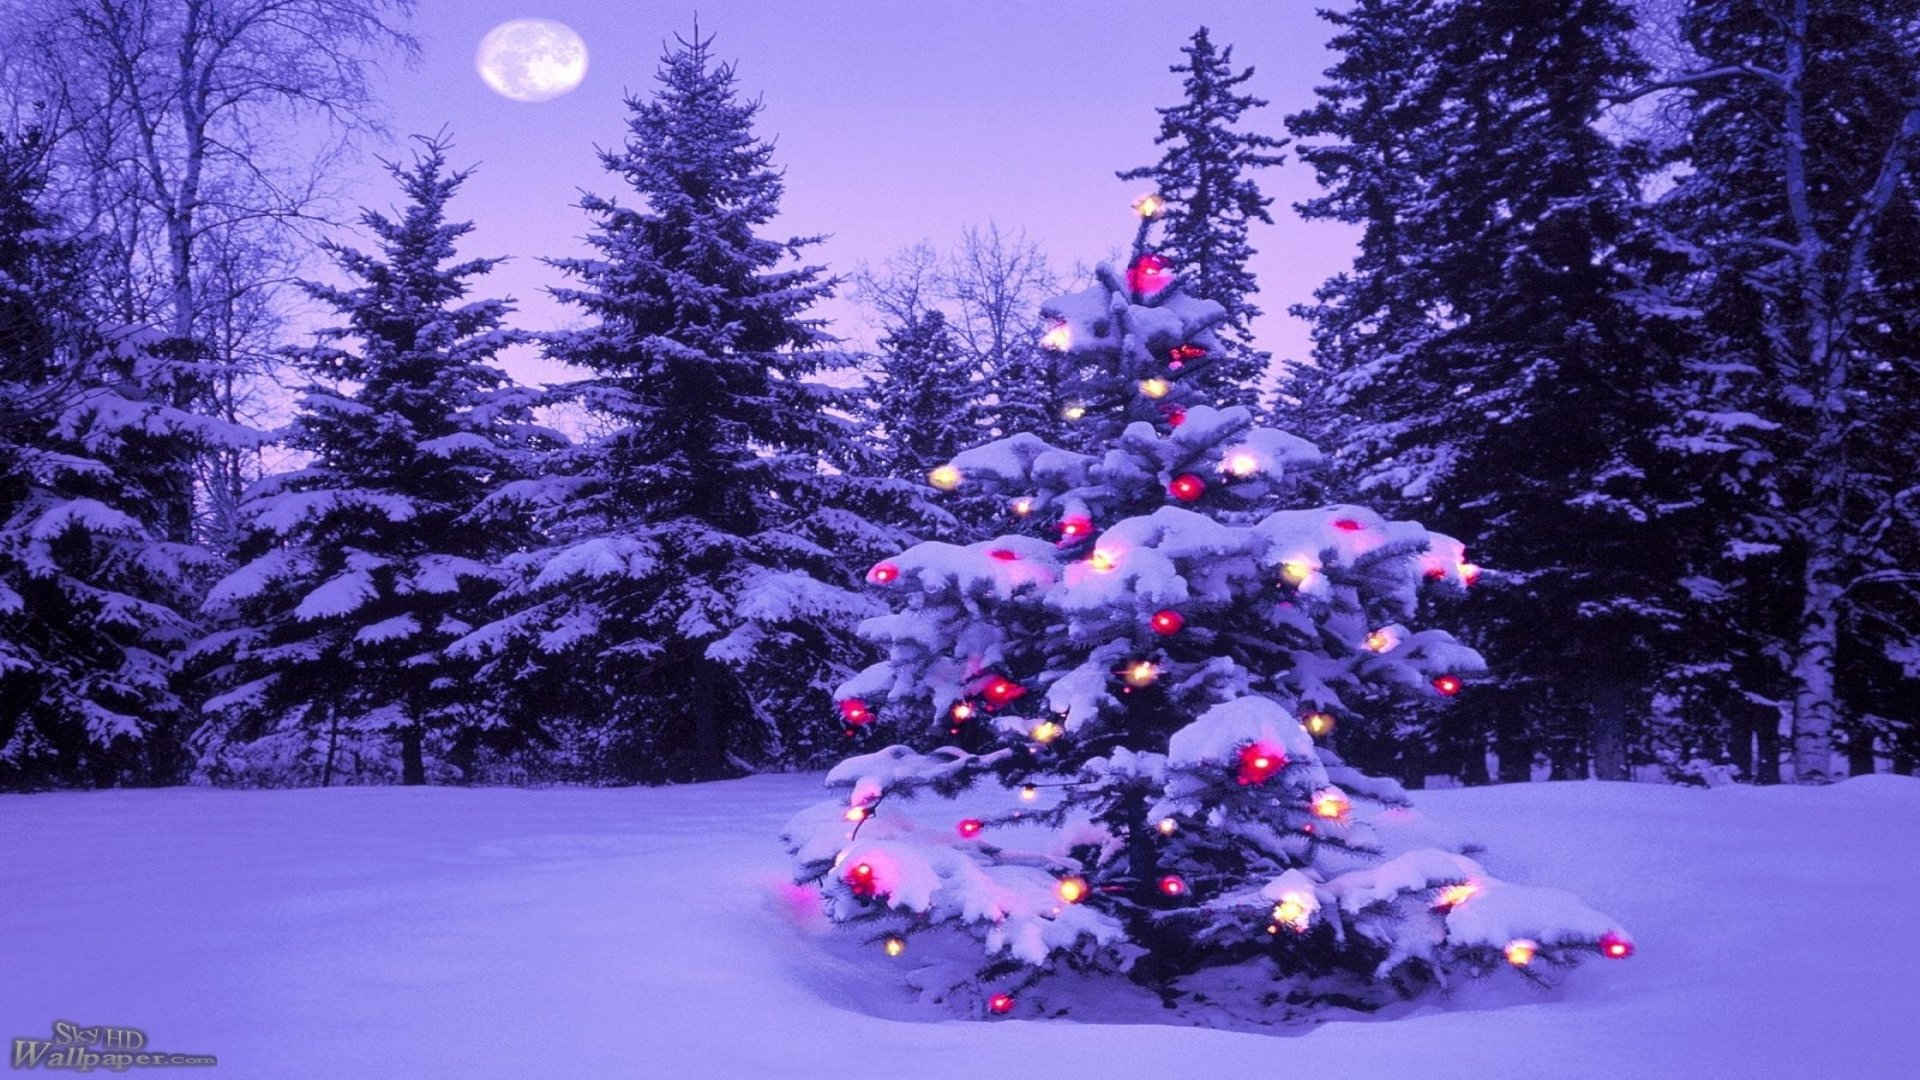 Lighted Christmas Tree in Winter Forest